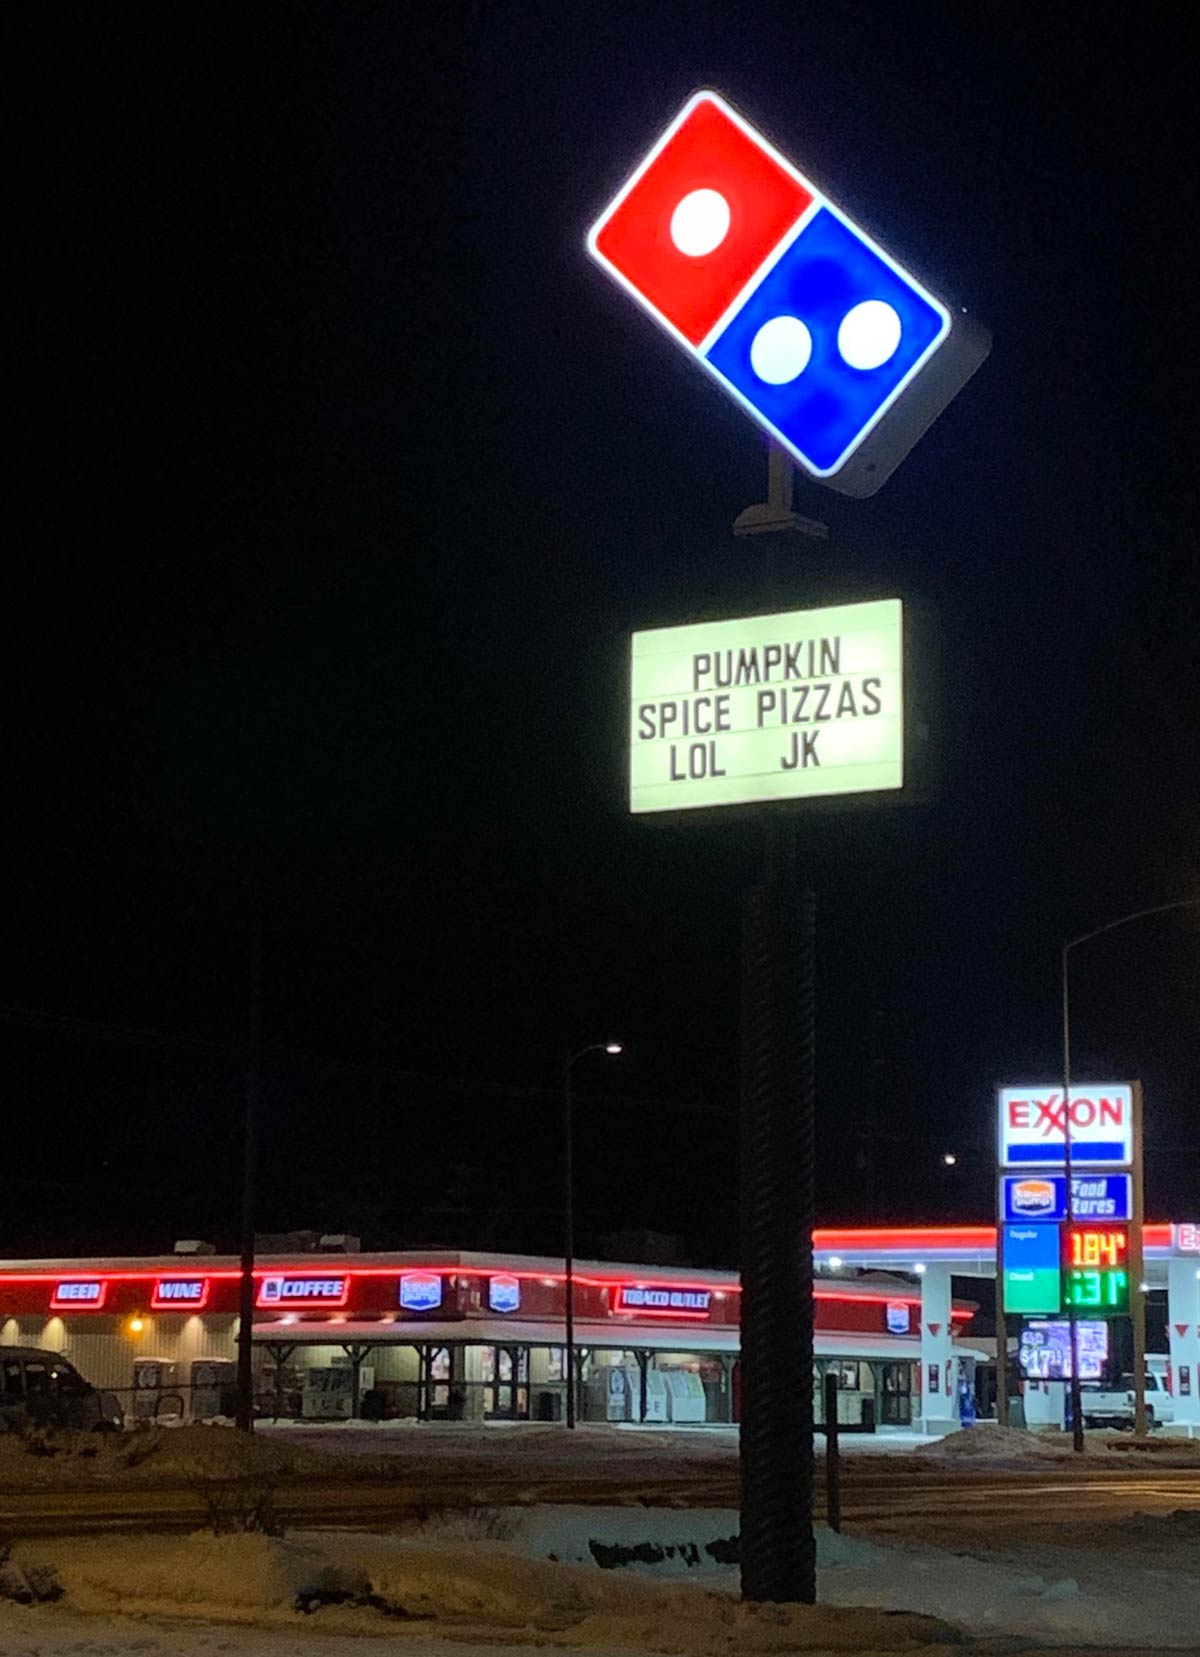 Local Domino's Pizza poking fun at your PSL addiction